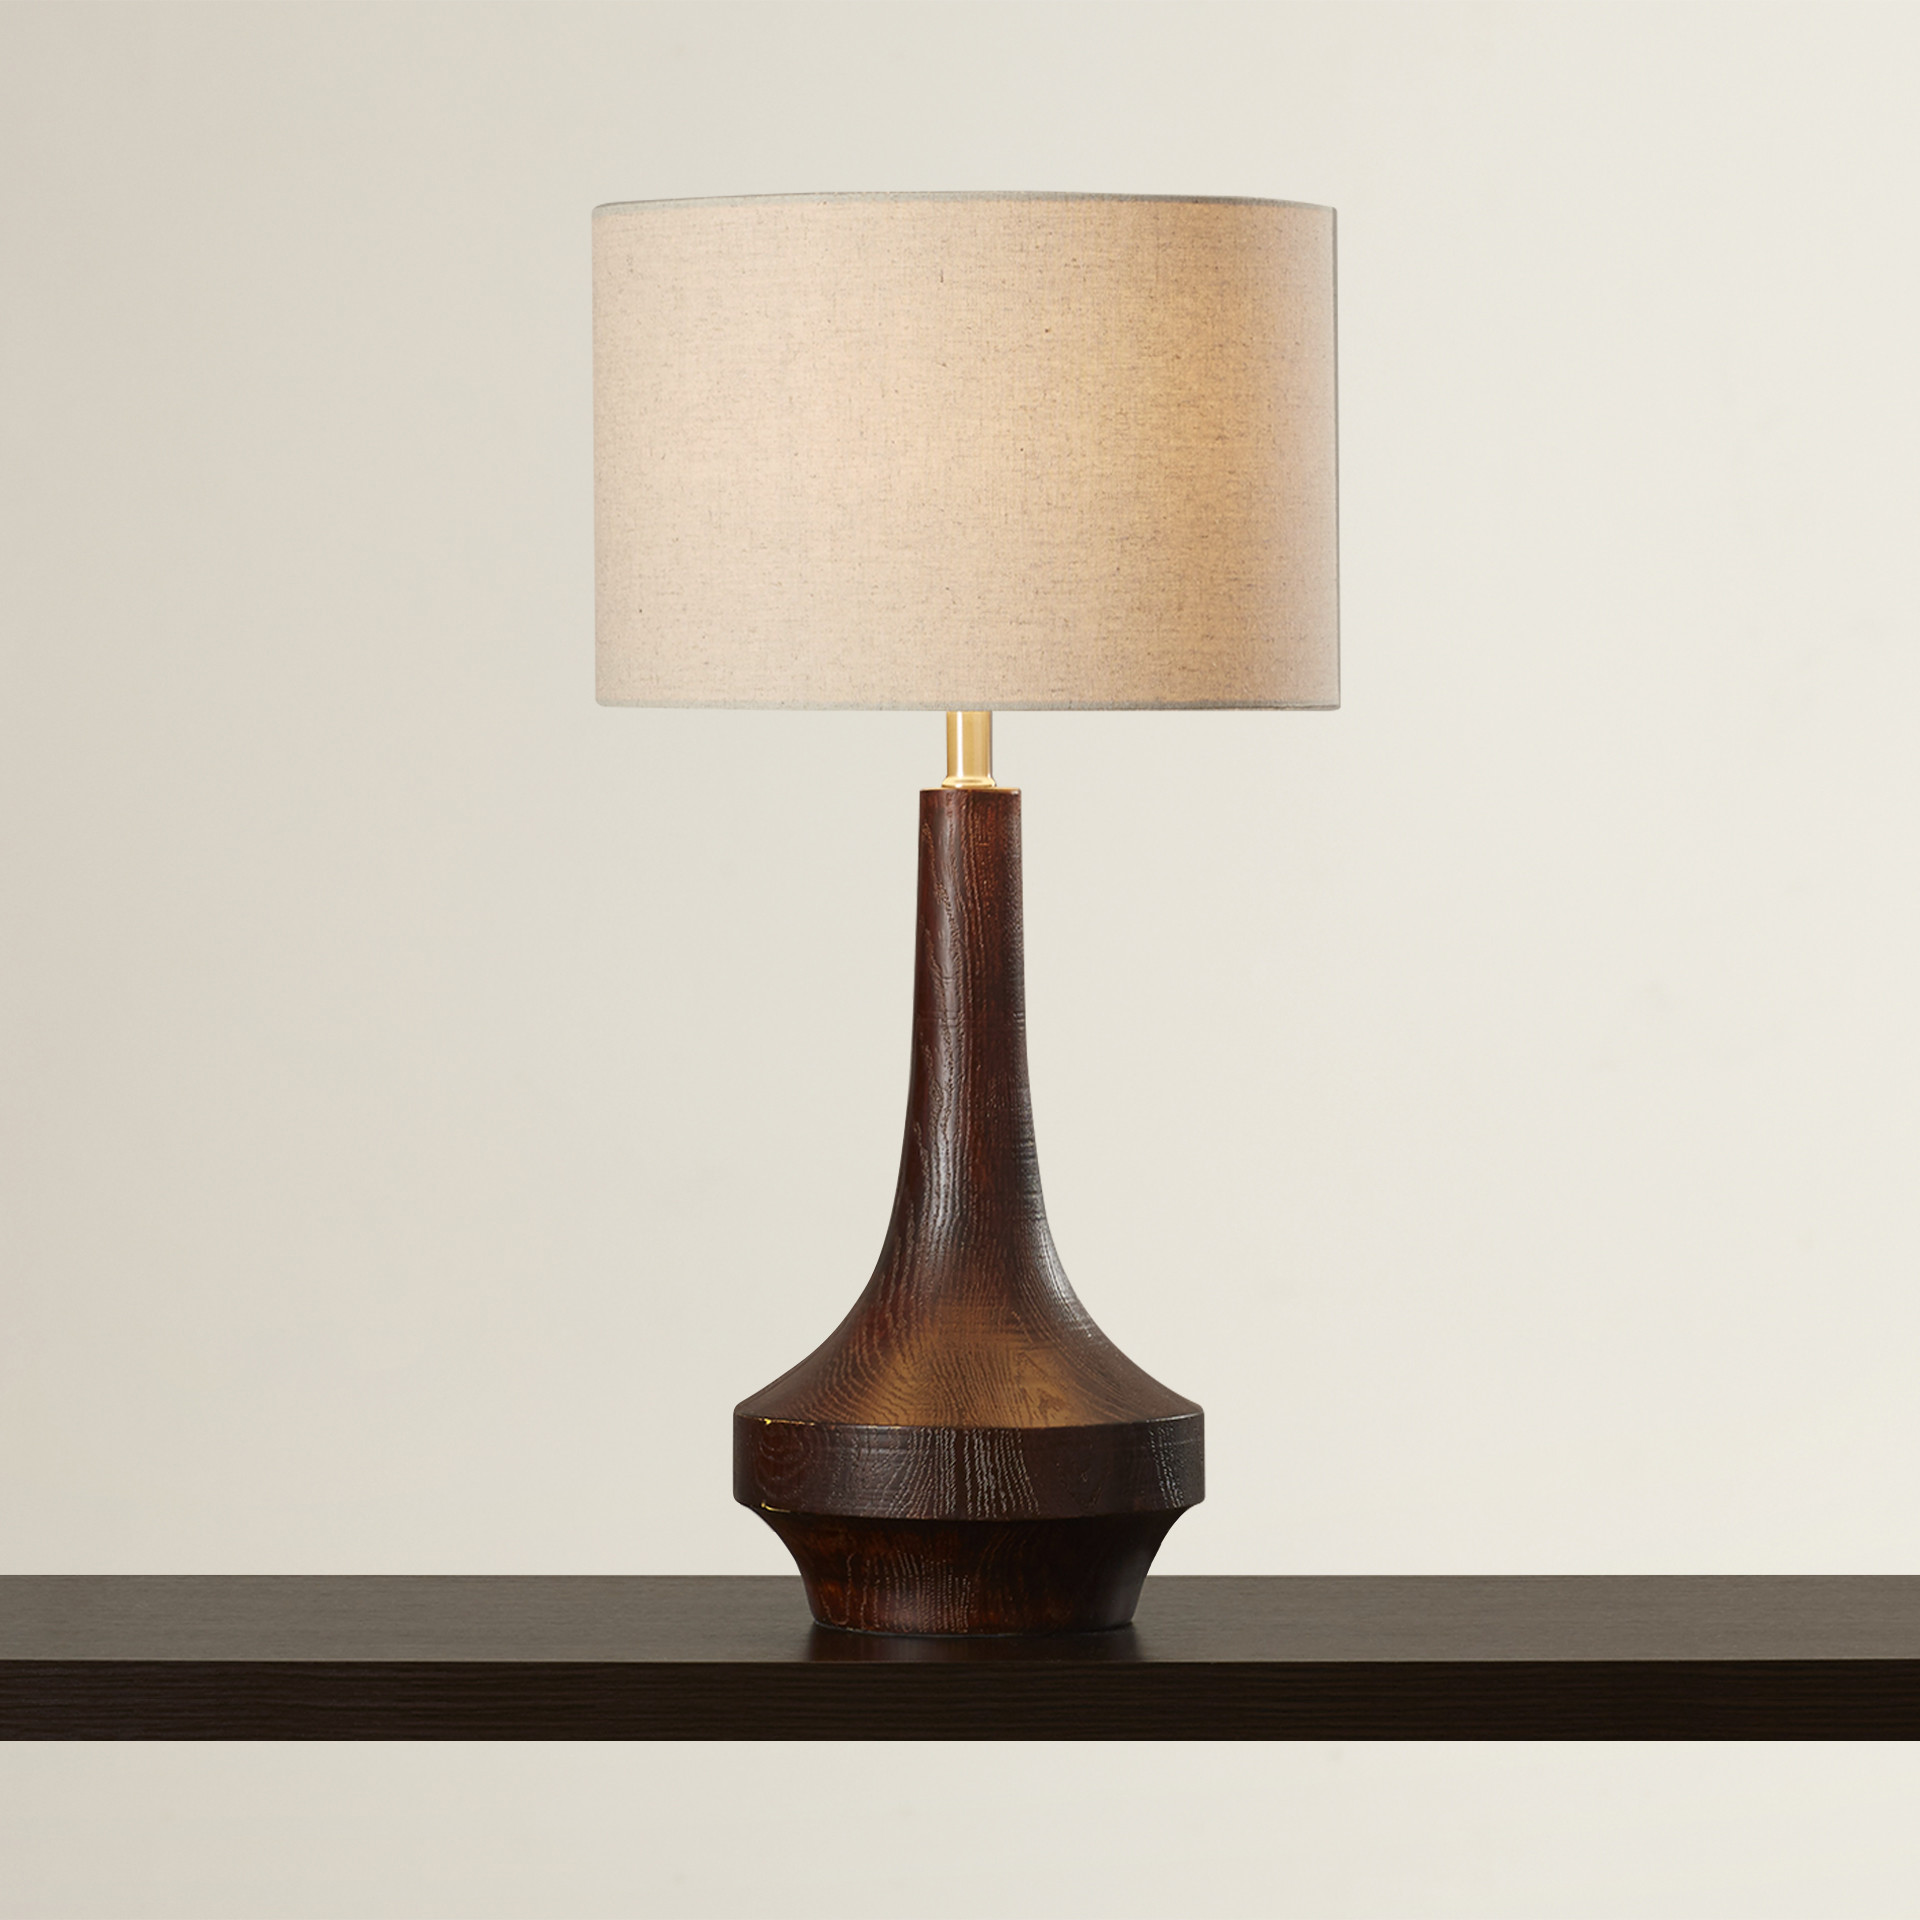 25 Mid century modern lamps to light up your life - Warisan Lighting